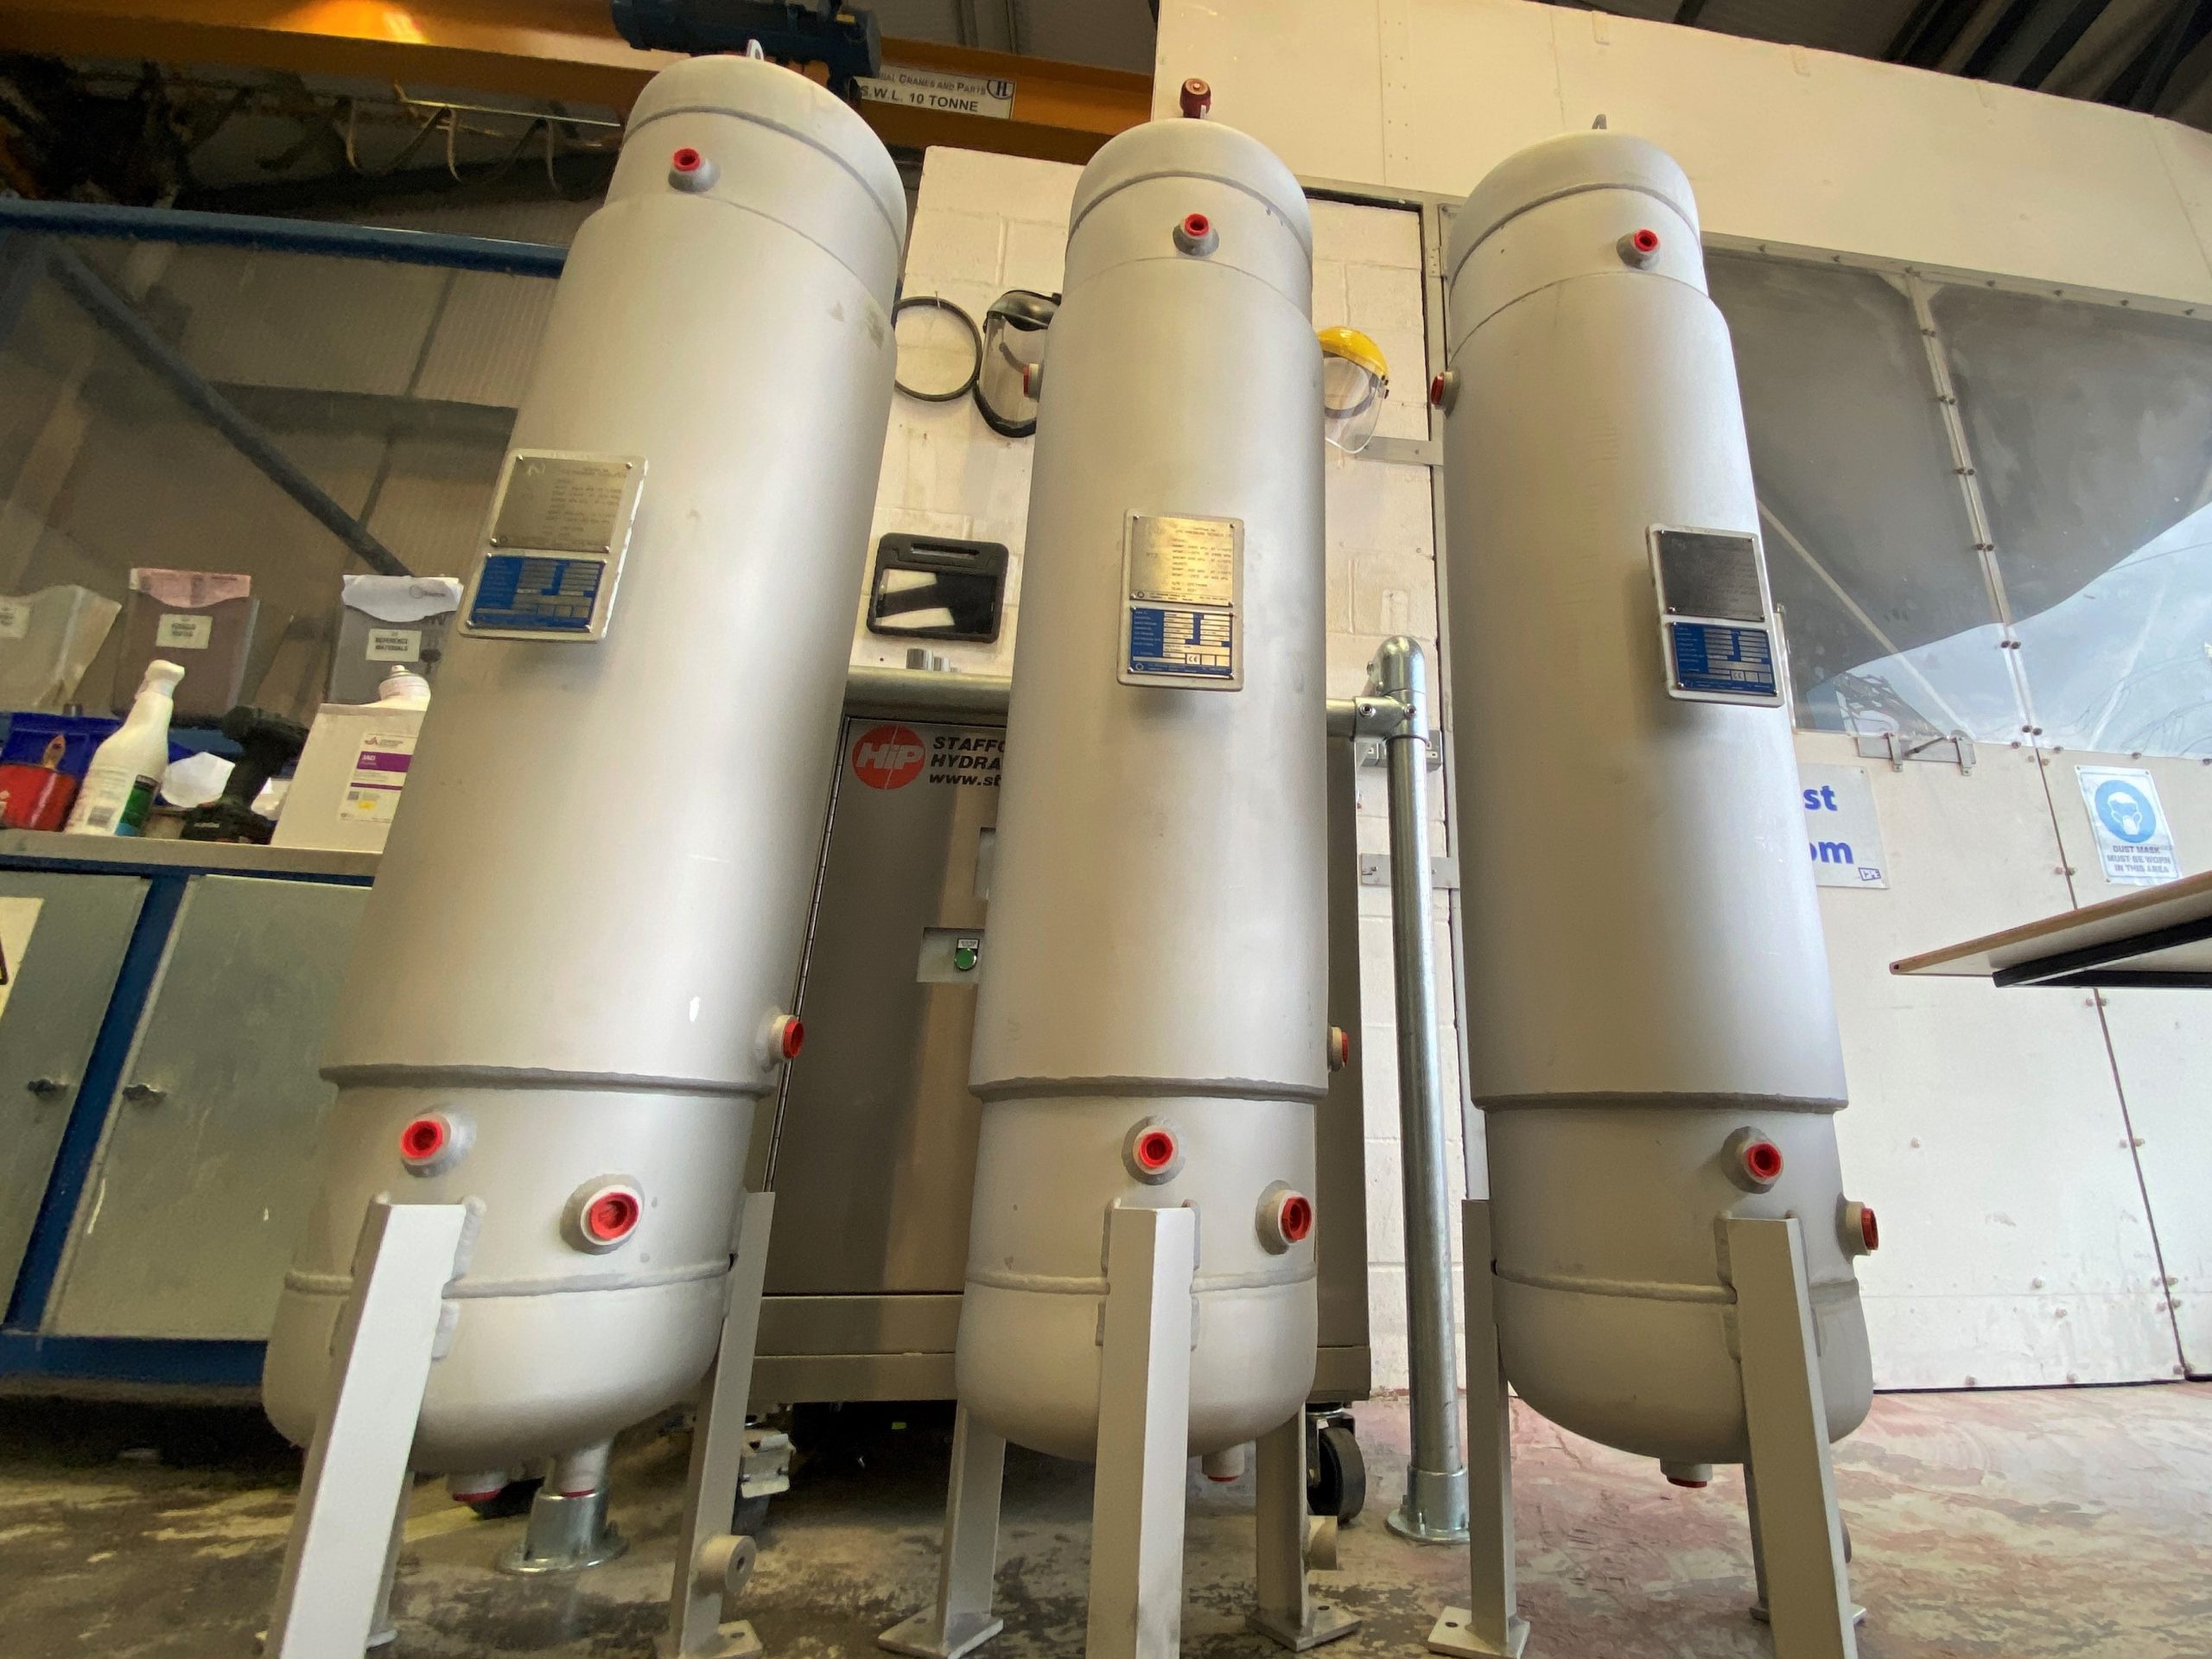 Hydrogen Jacketed Pressure Vessels with the ASME U Stamp